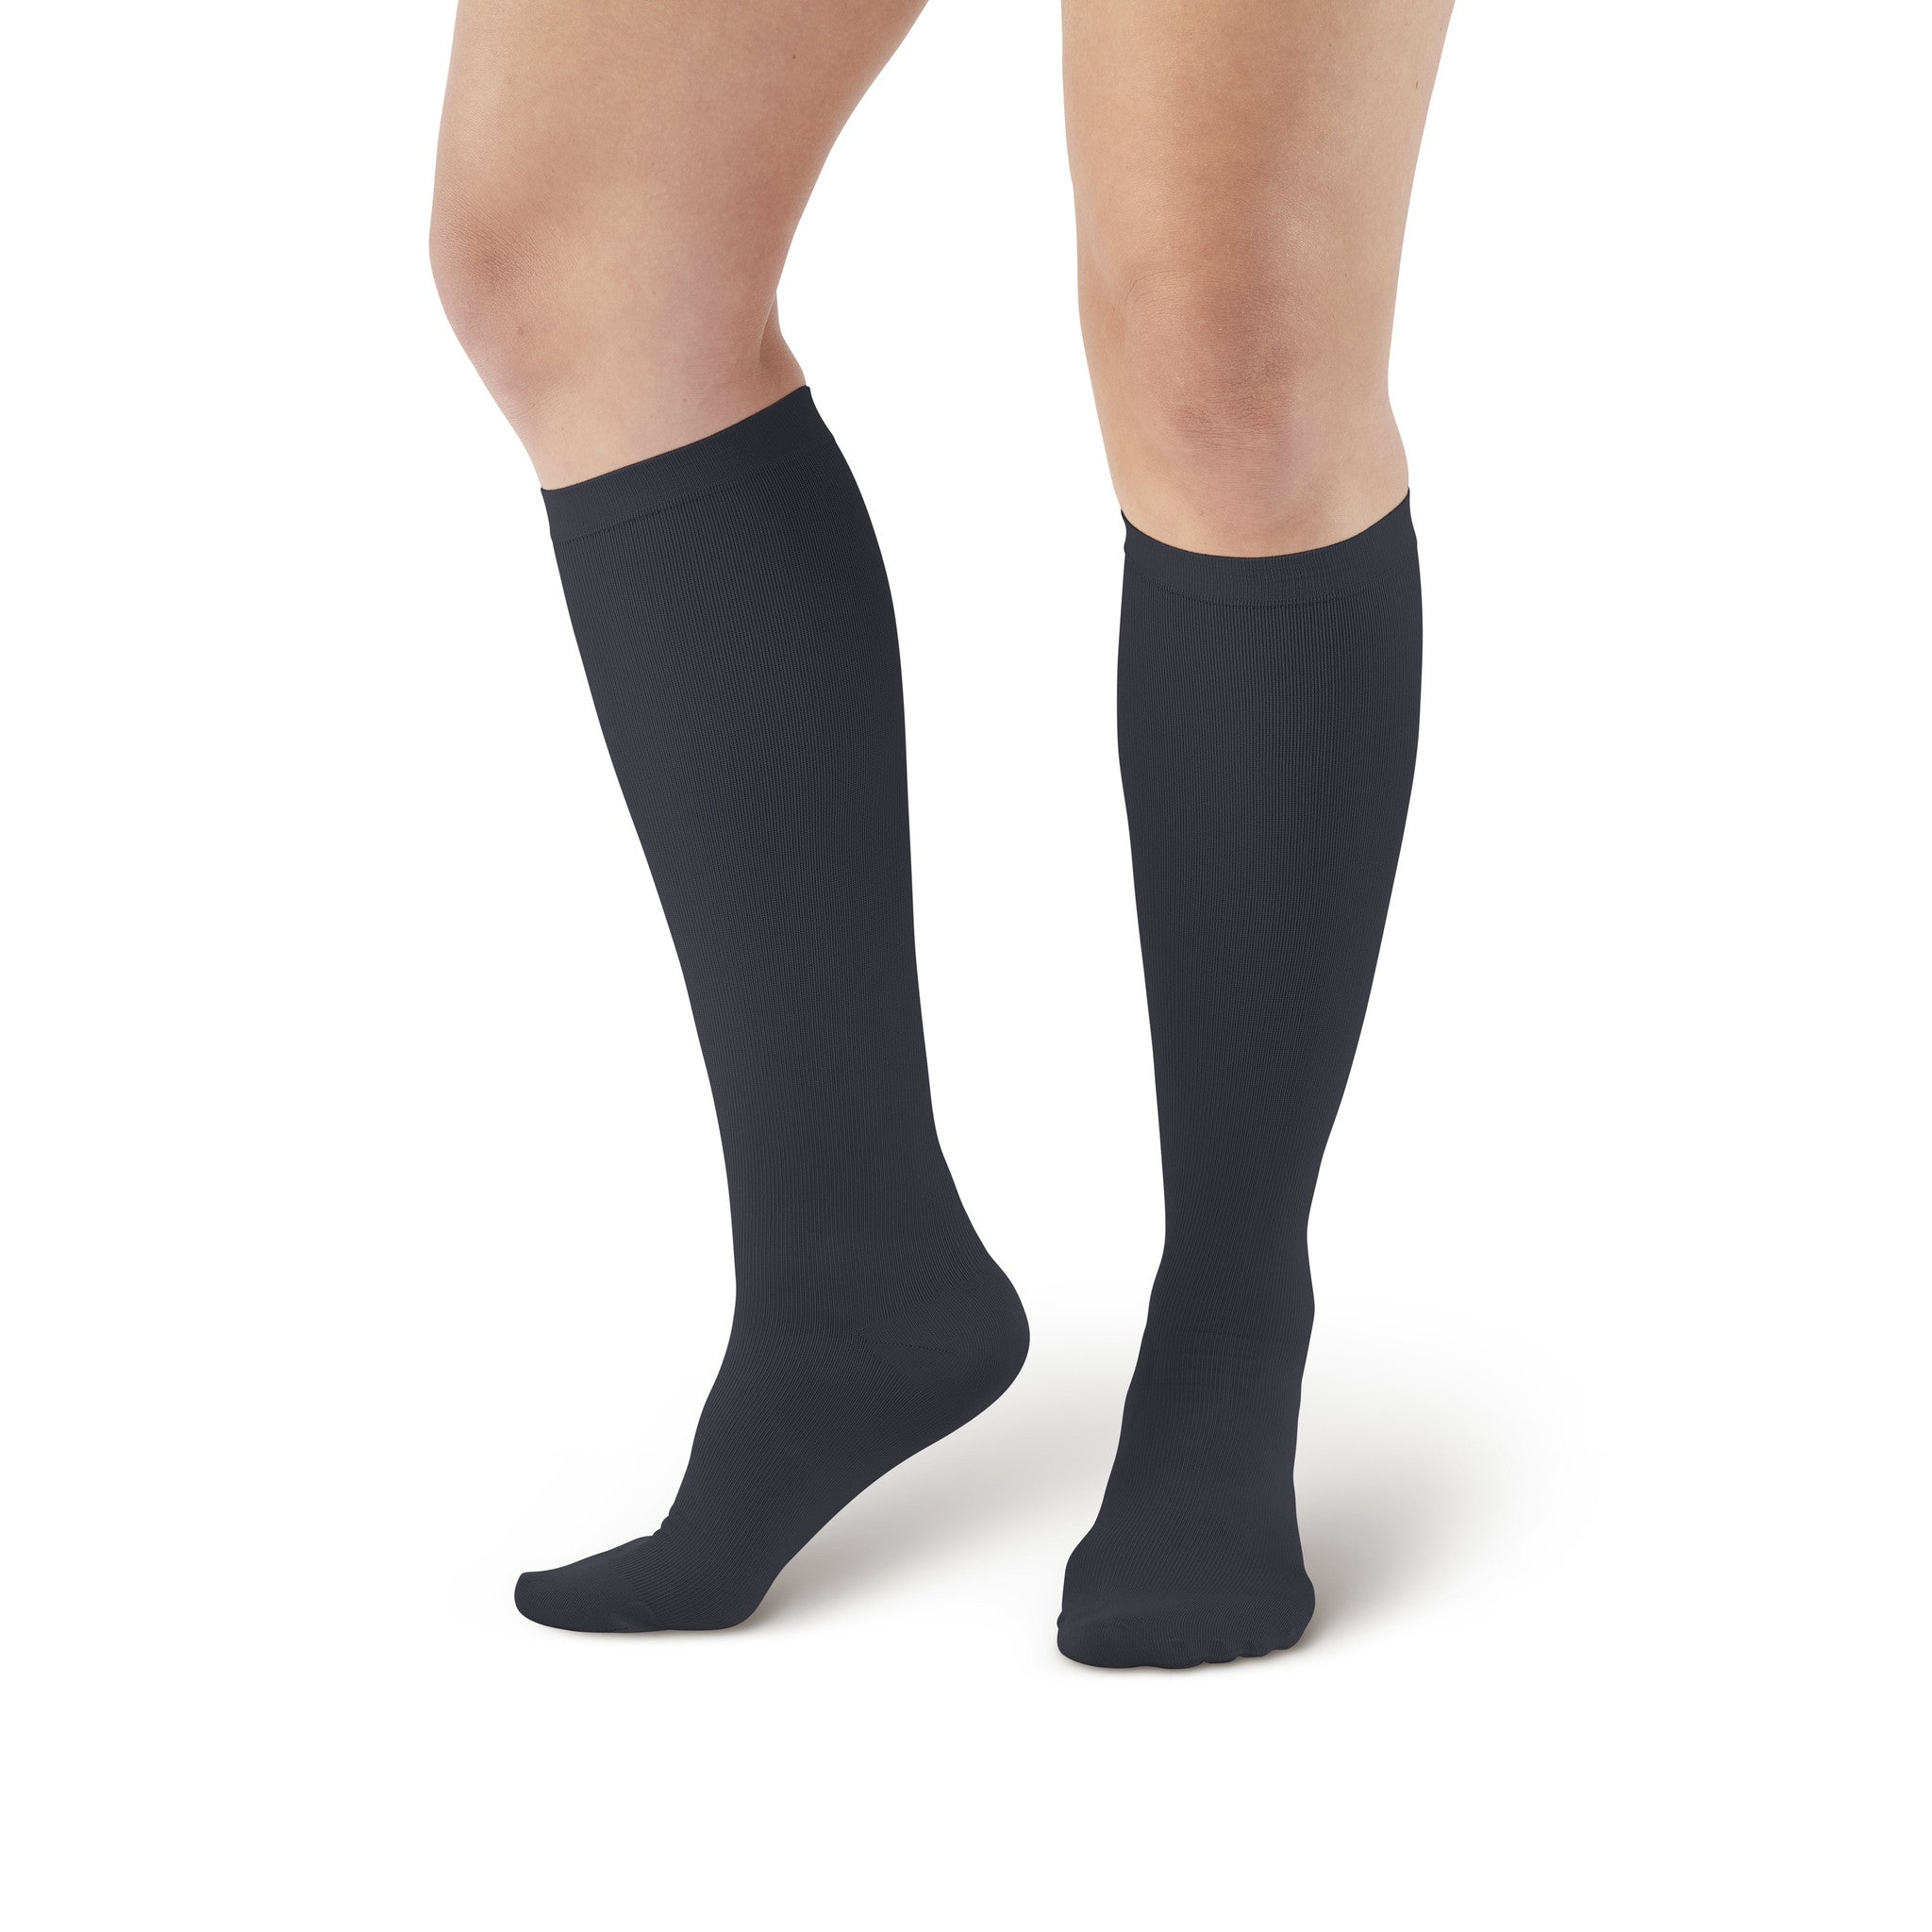 Women's Over-the-Knee Tights  Everyday skirts, Tights, Microfiber